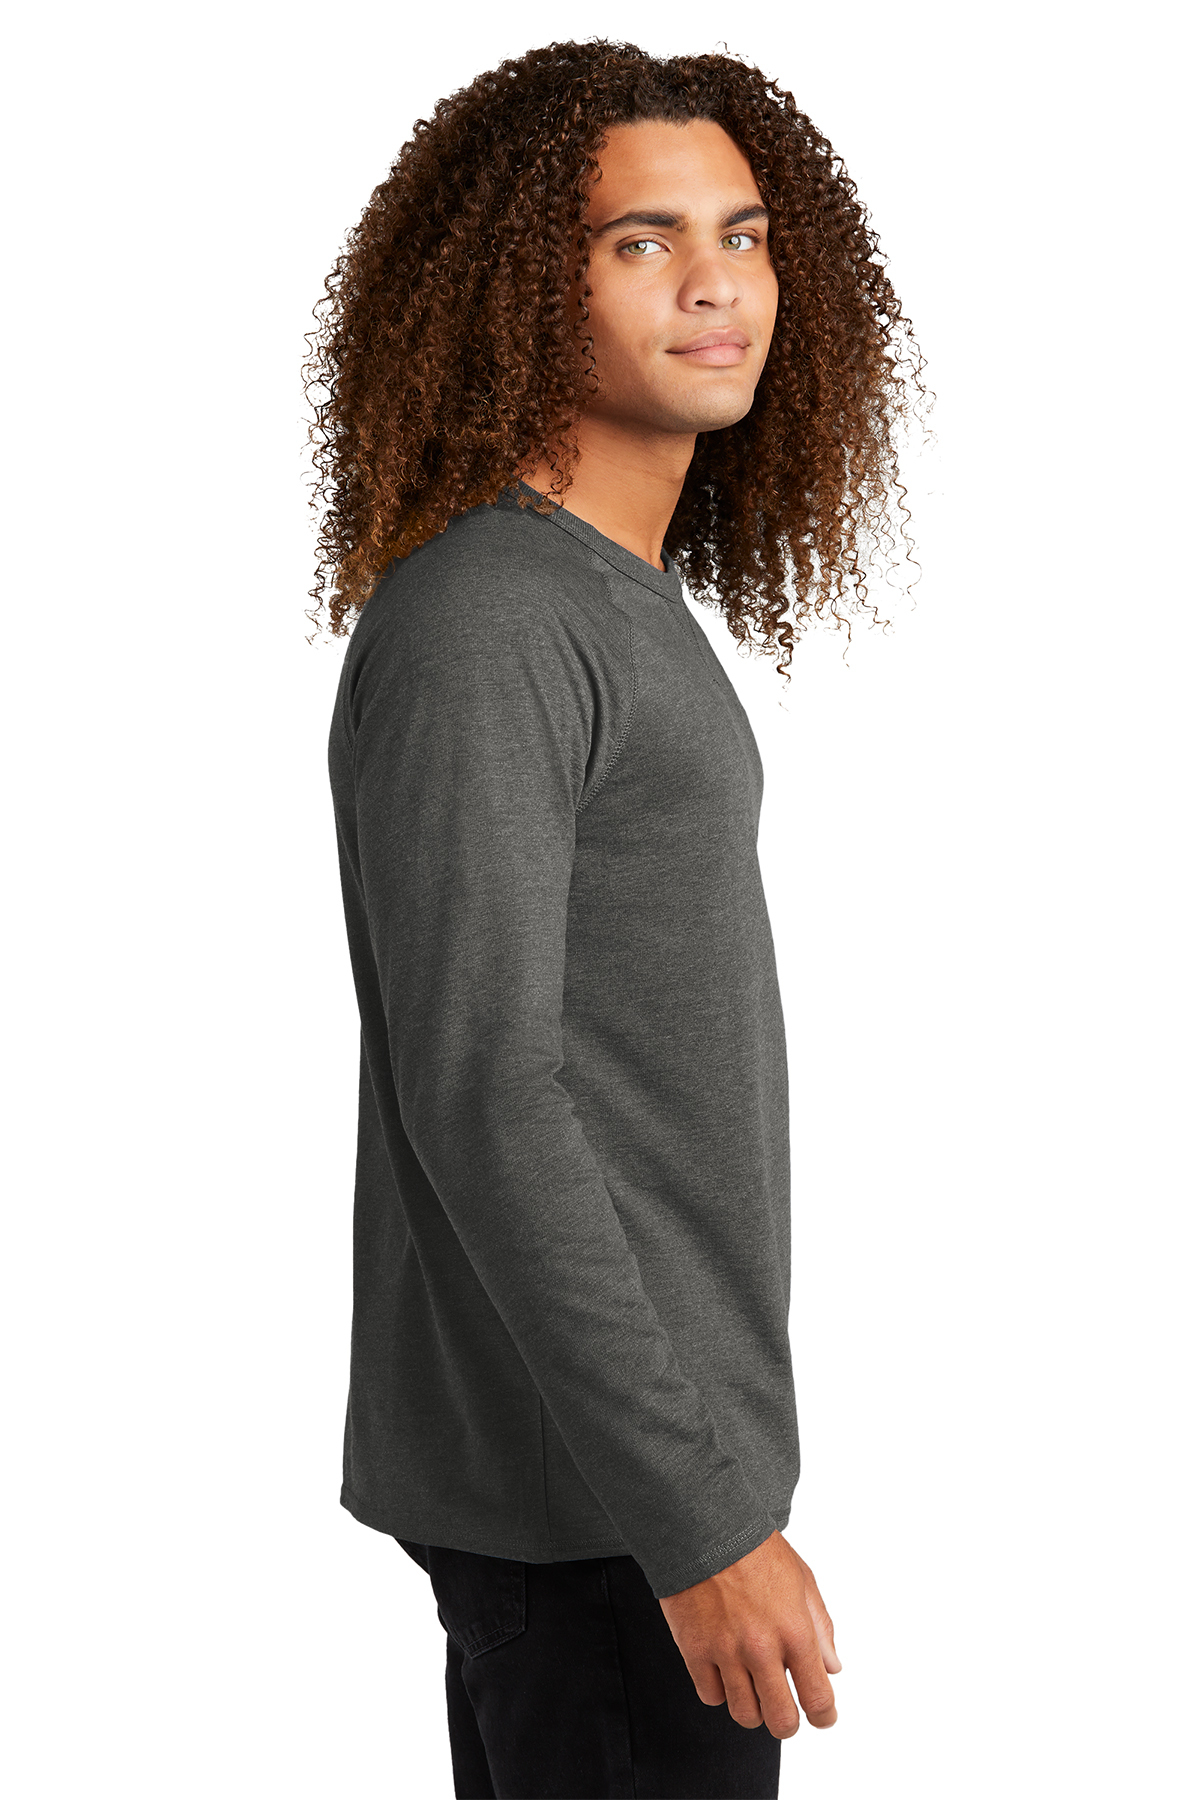 Product French SanMar Featherweight | Long Terry District Crewneck Sleeve |